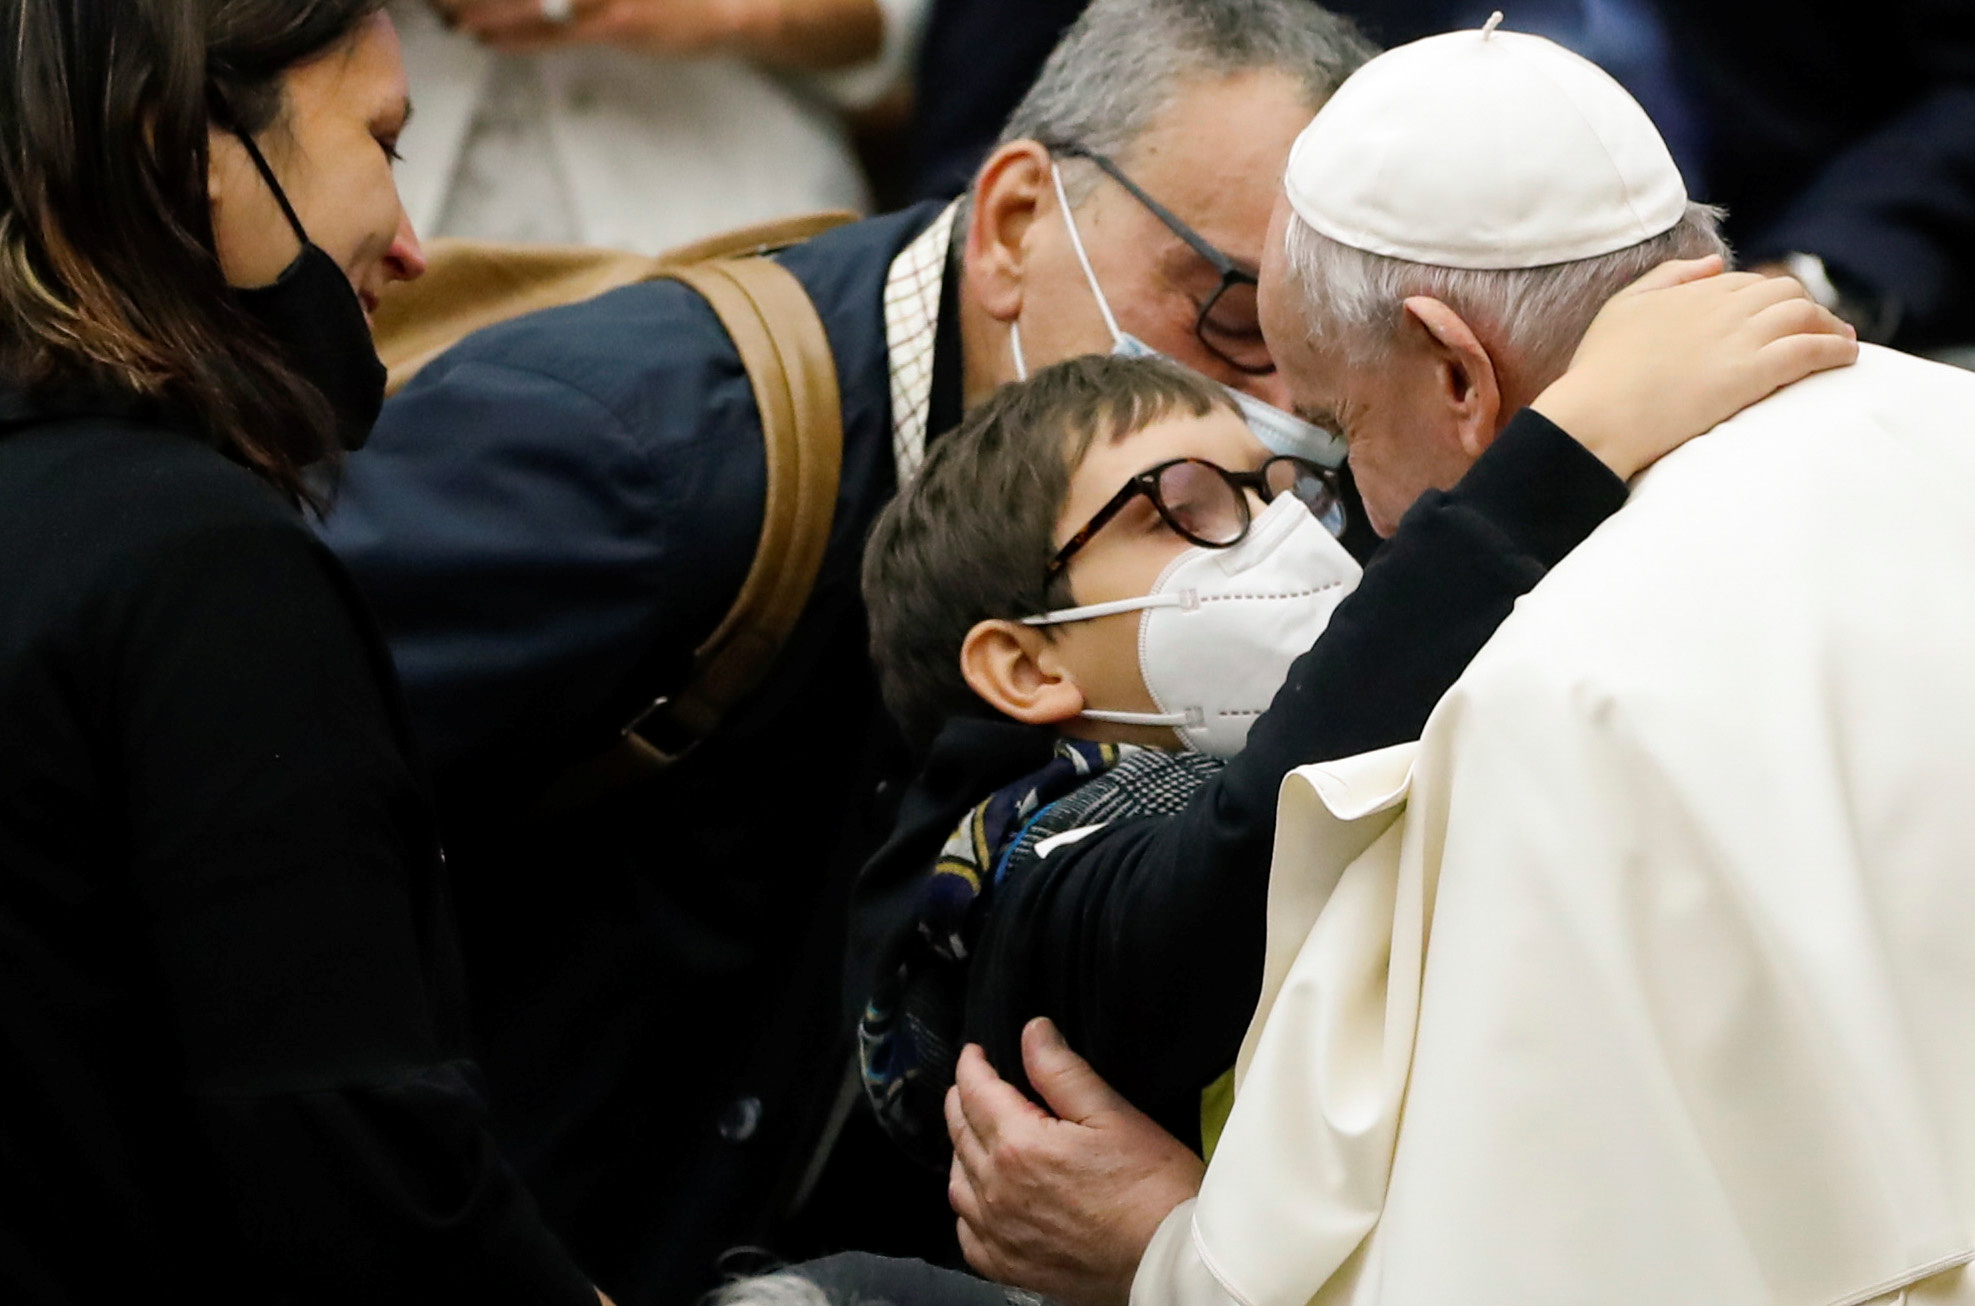 Pope Francis embraces a boy after the weekly general audience at the Vatican, October 20, 2021. REUTERS/Remo Casilli